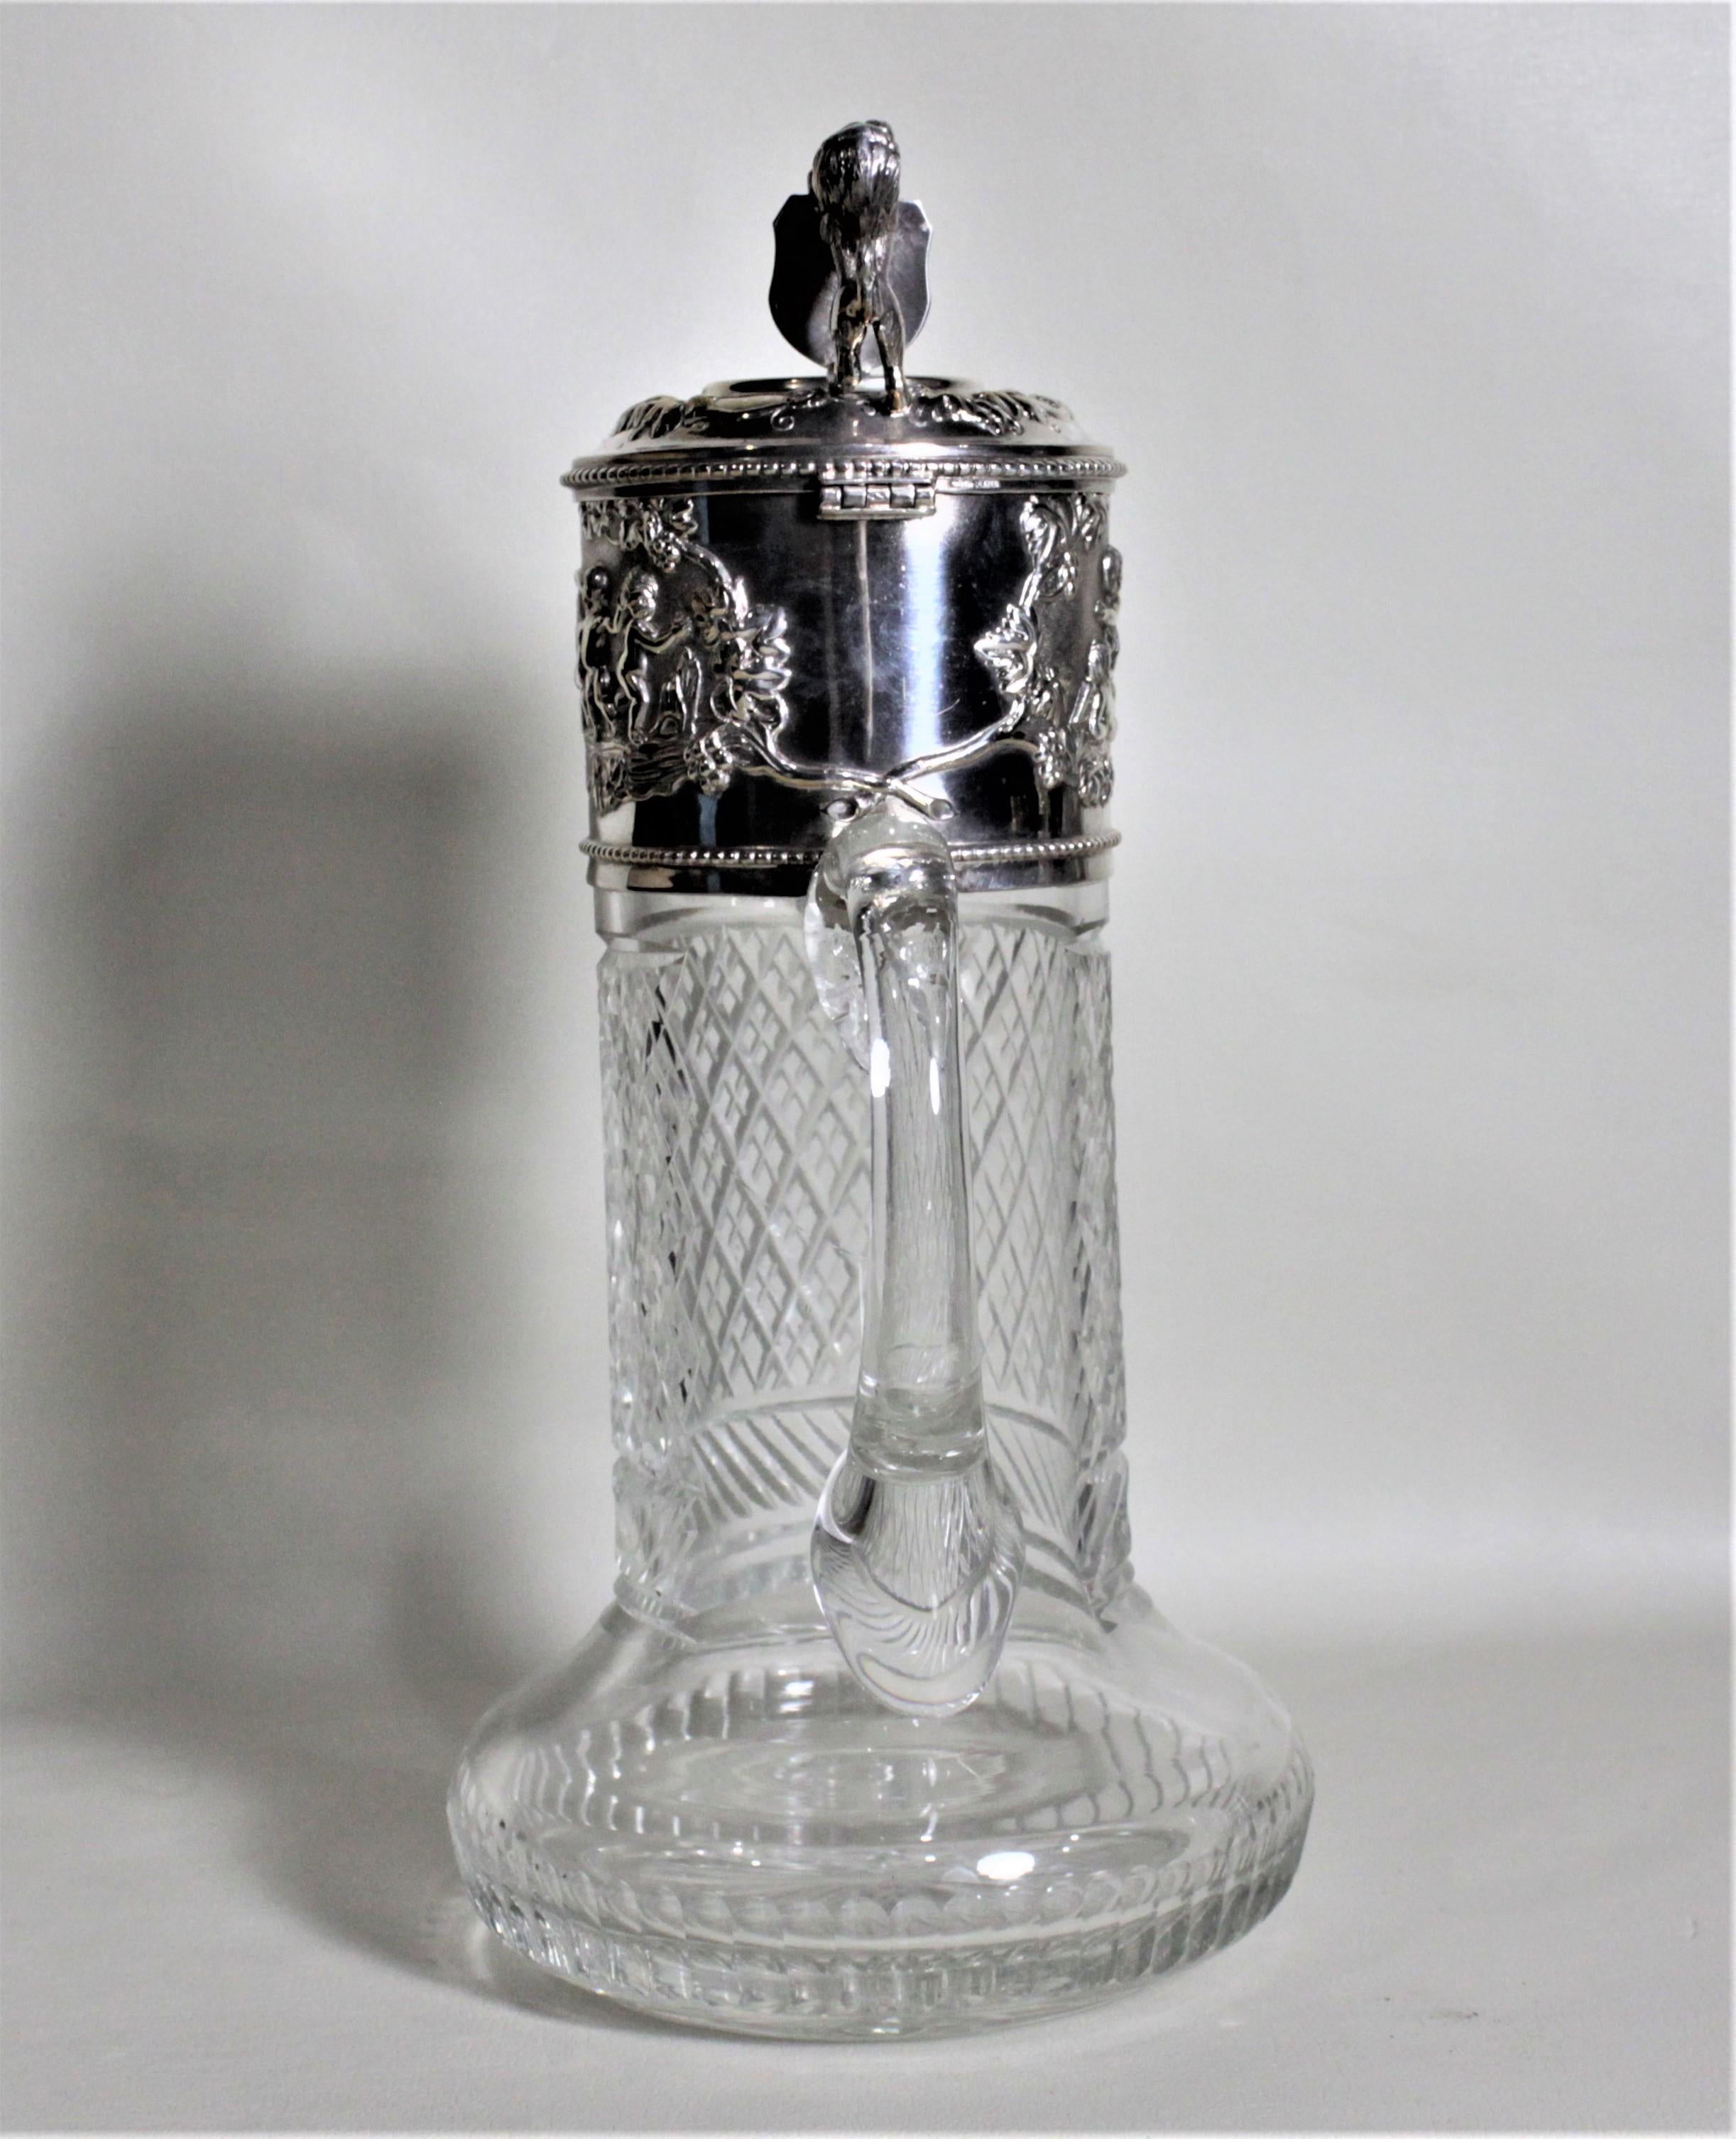 Victorian Antique English Silver Plated and Cut Glass Claret Jug or Decanter